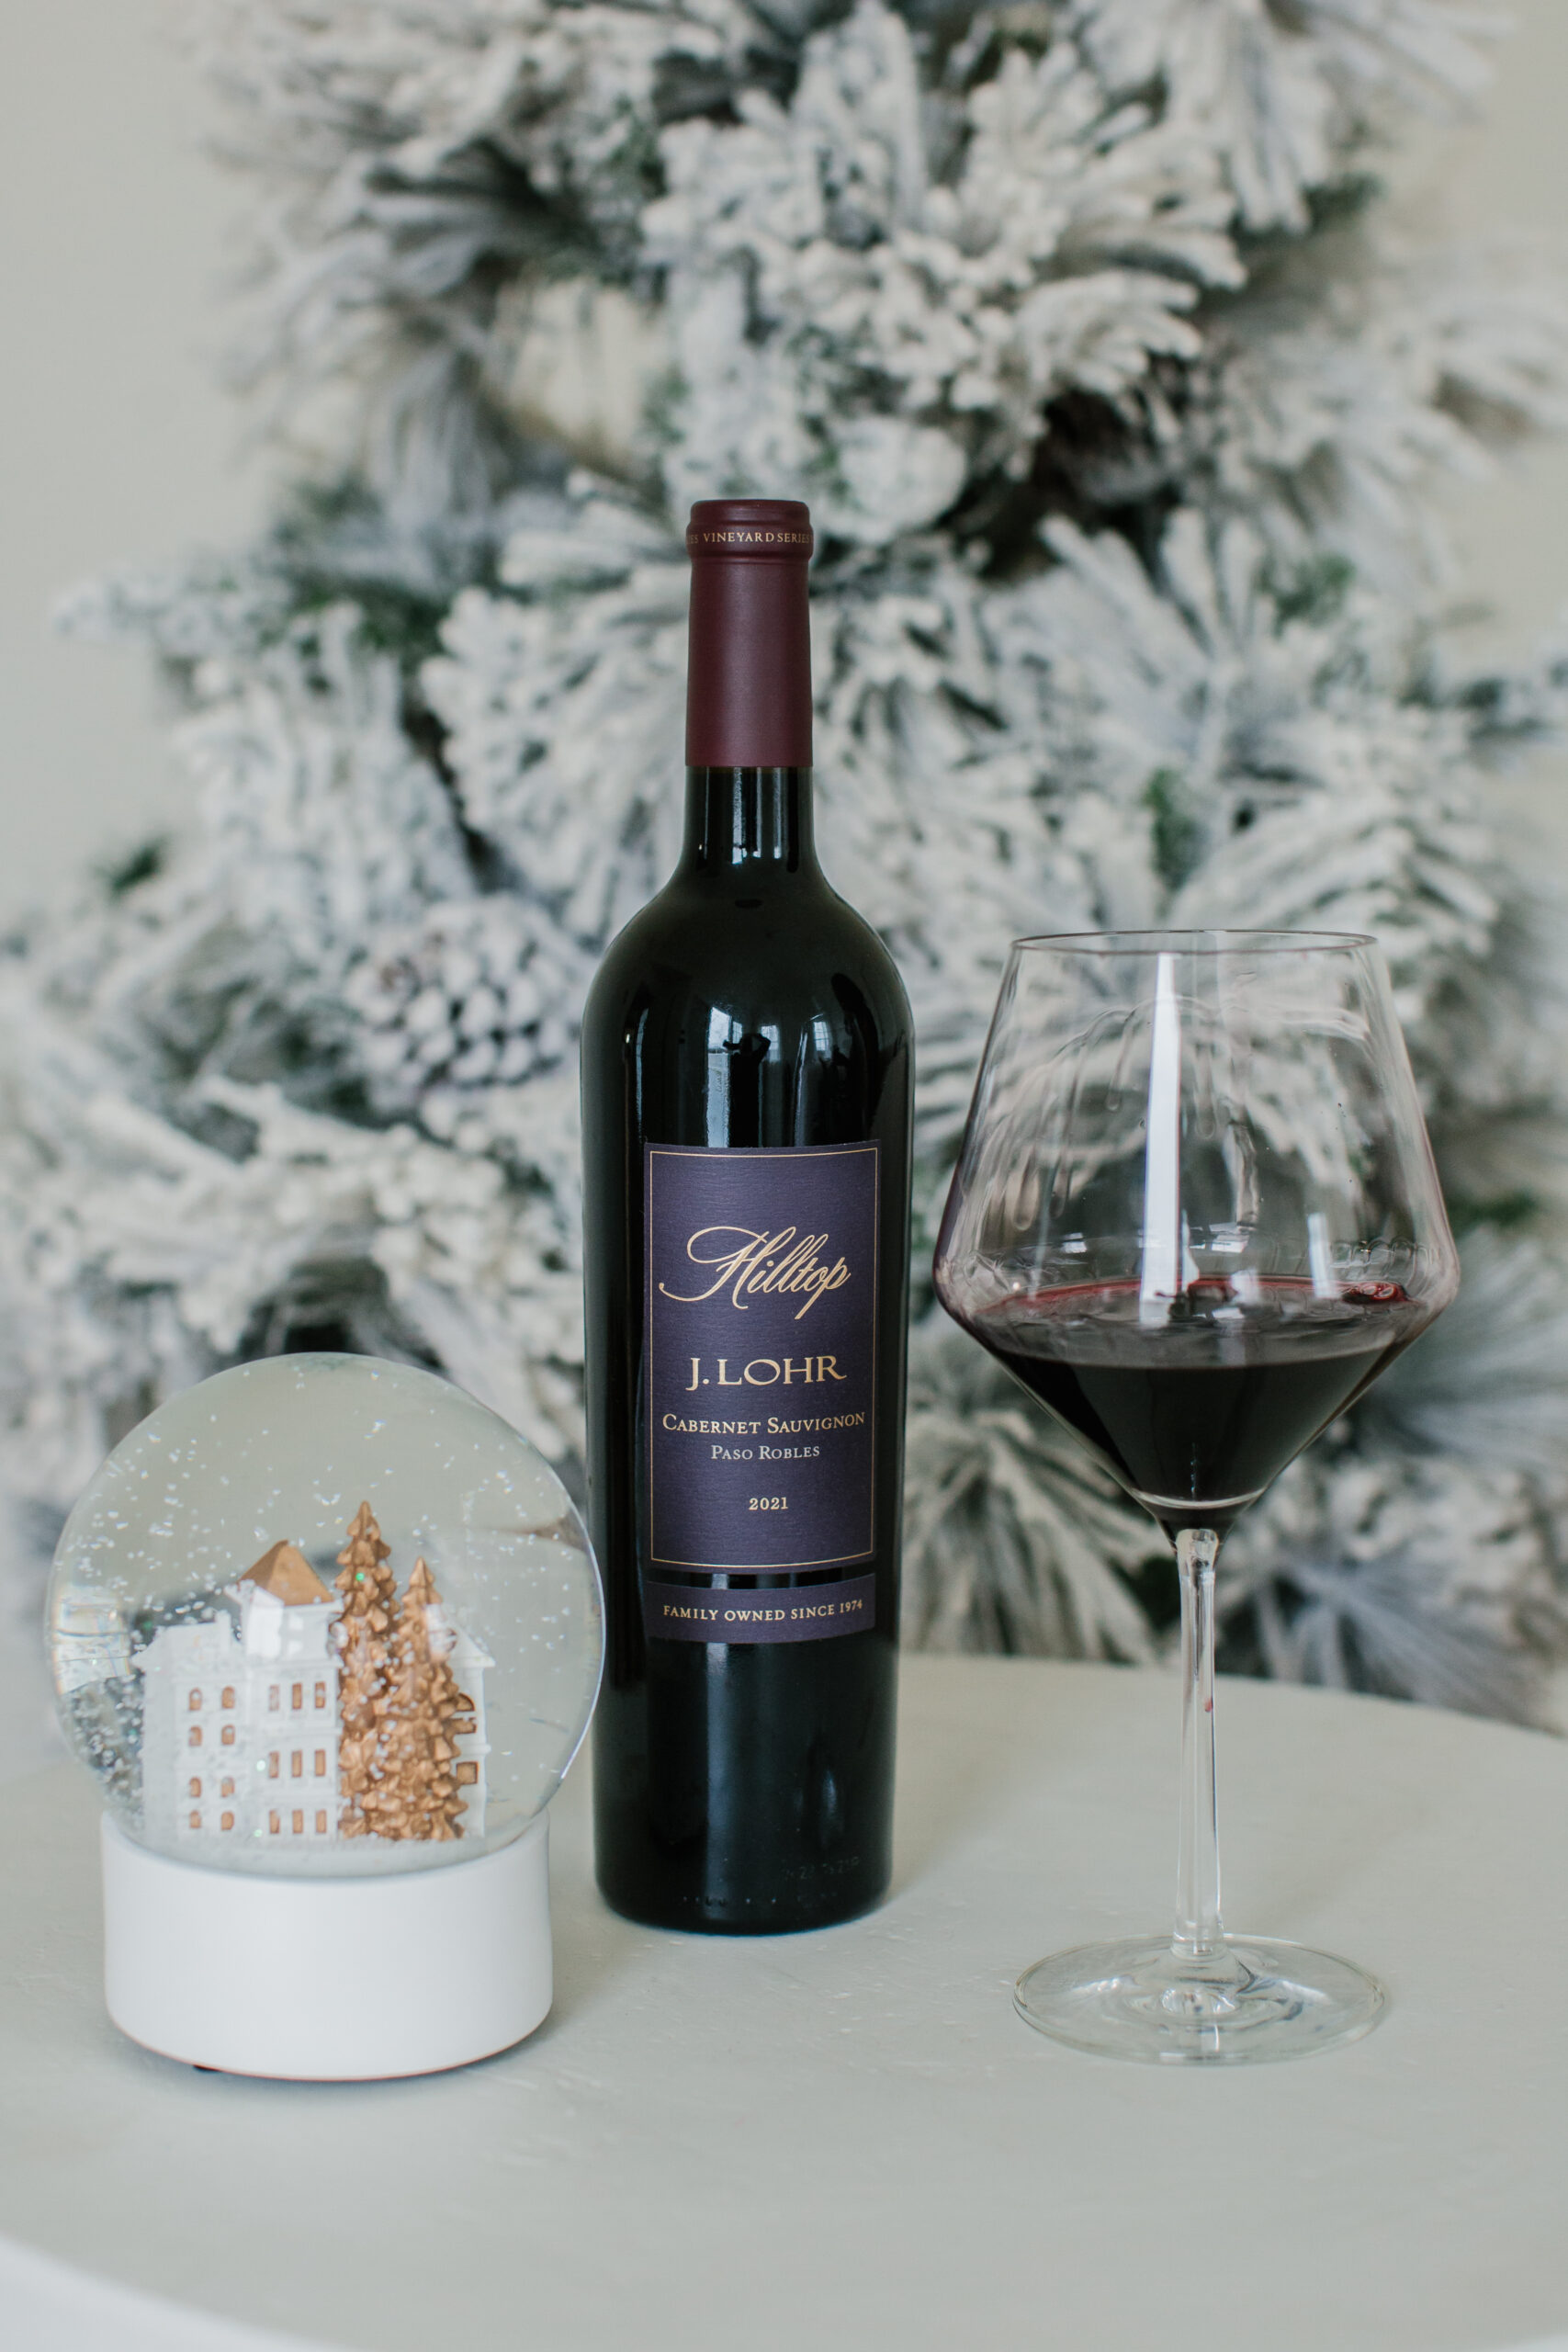 Looking for the perfect last minute hostess gift this year? CLICK HERE to see why wine makes for the perfect hostess gift!